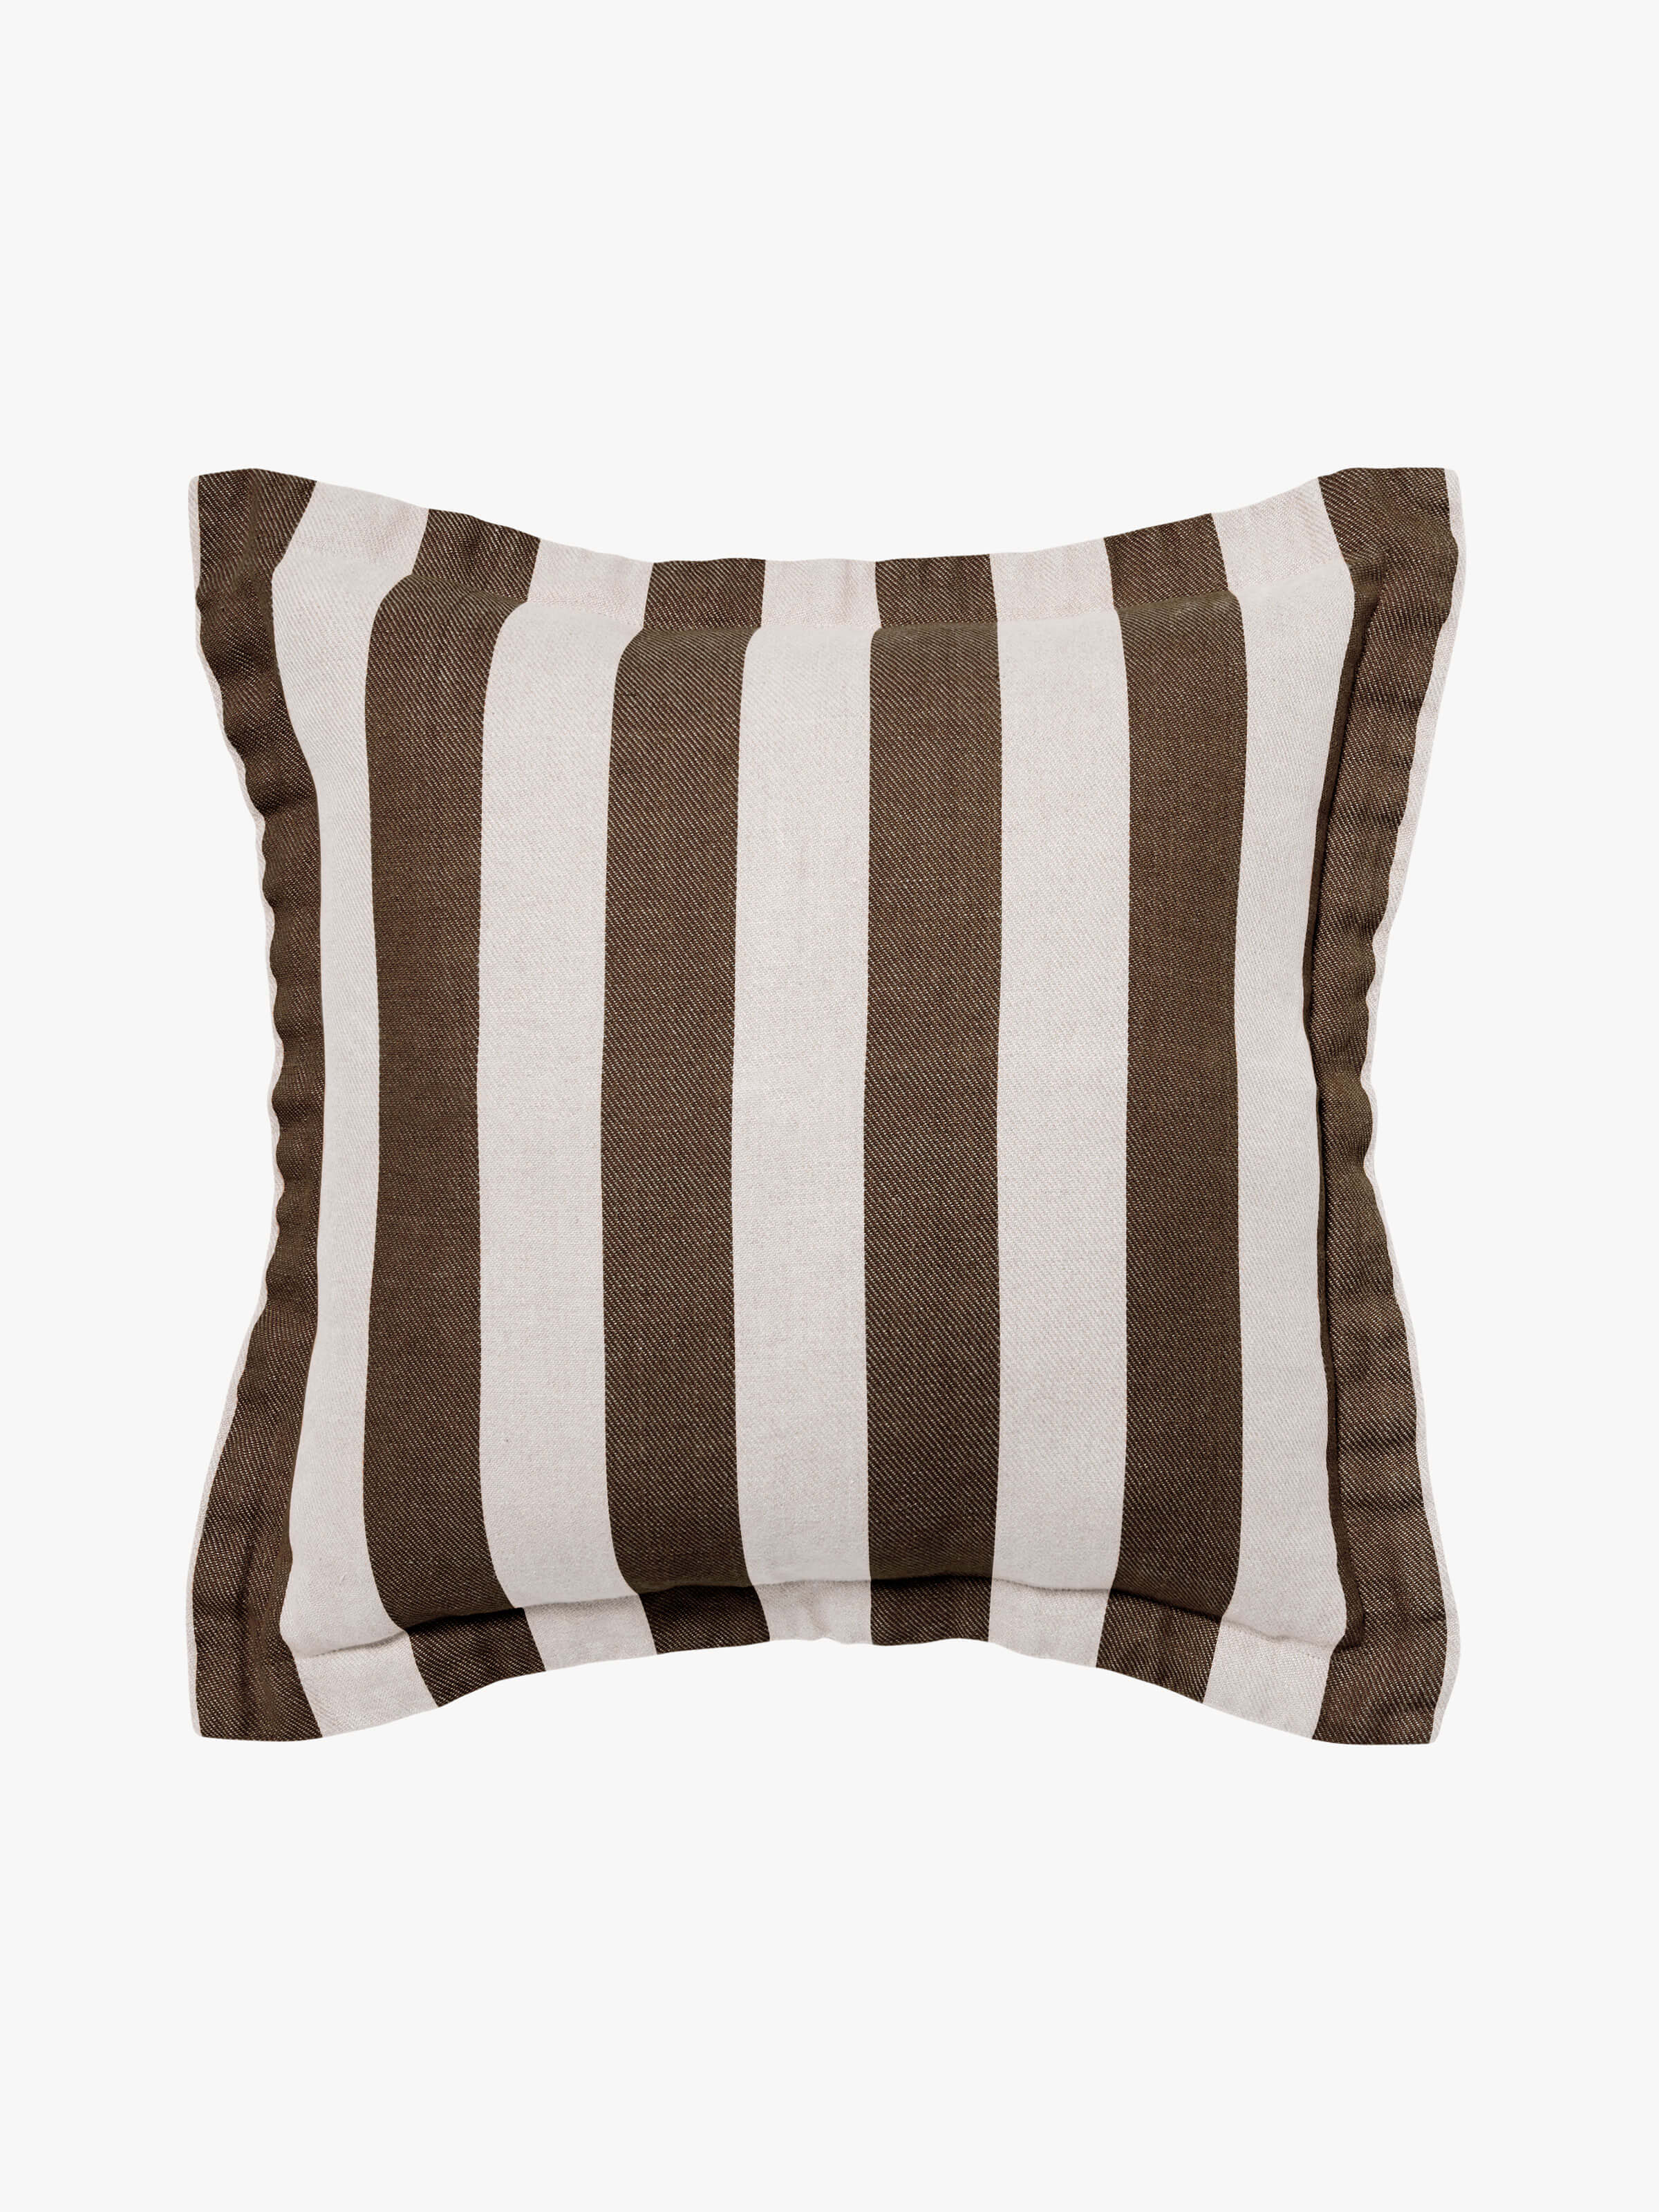 Voyage Chocolate French Linen Cushion